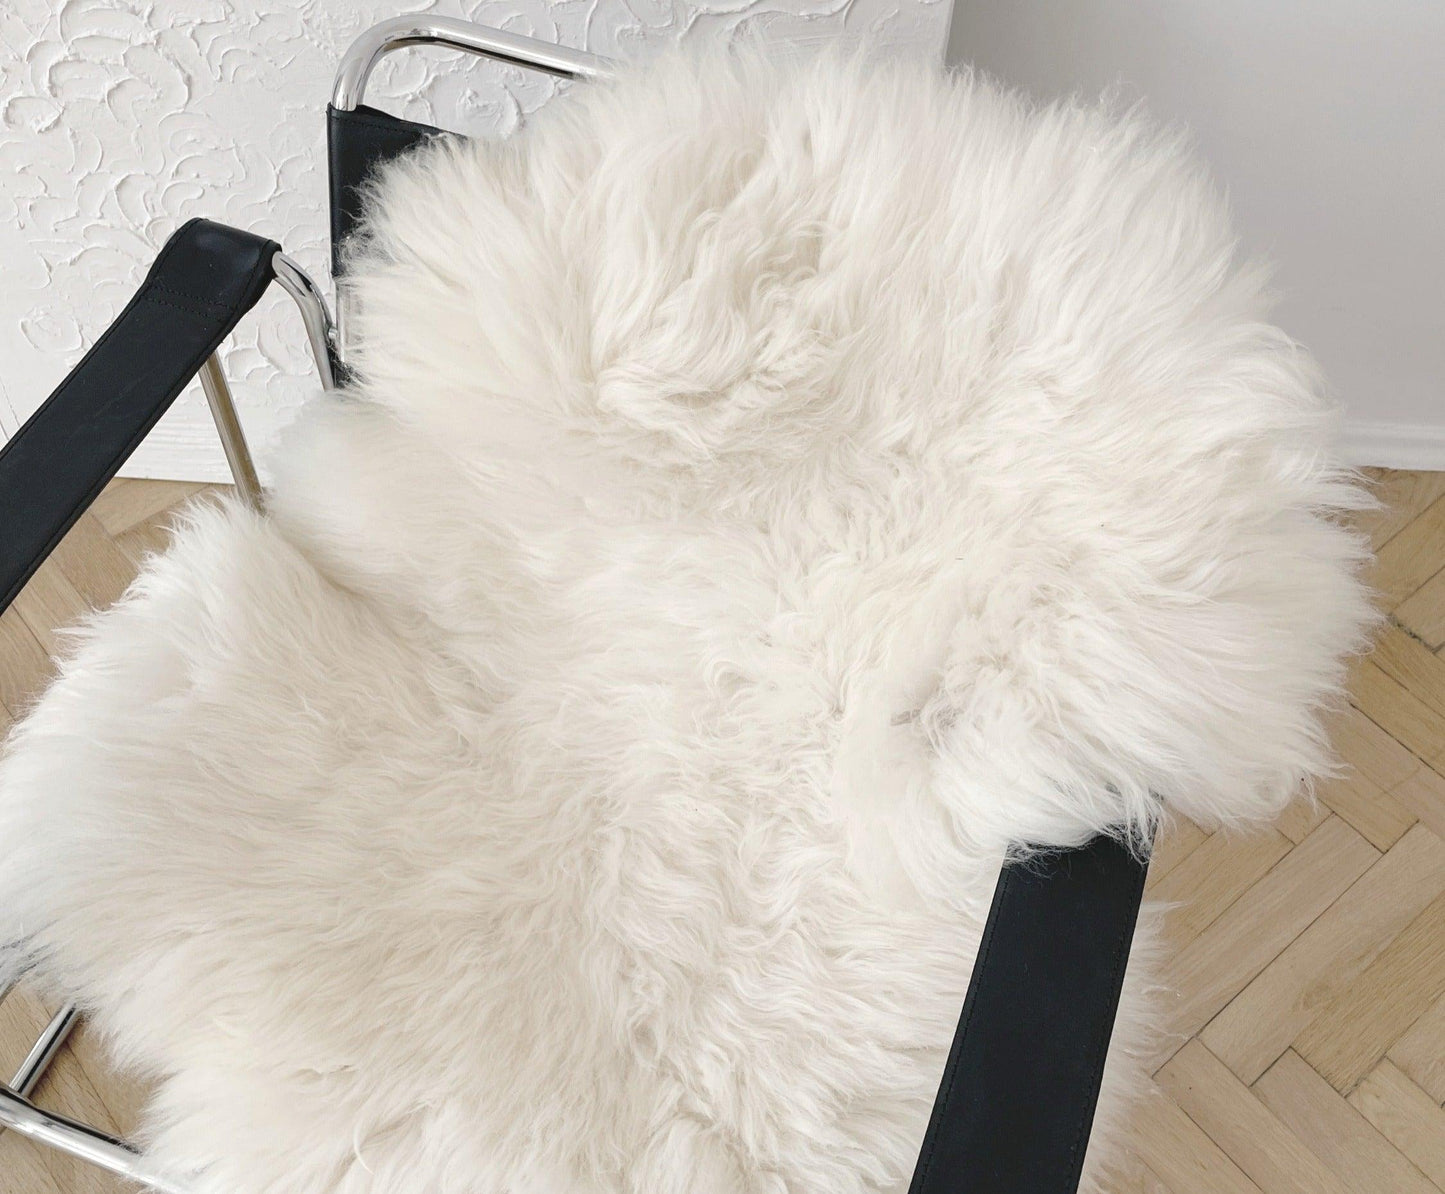 A chair with a white Natural Sheepskin Rug for Pet from Mellow Pet Store, suitable for Organic pet accessories.